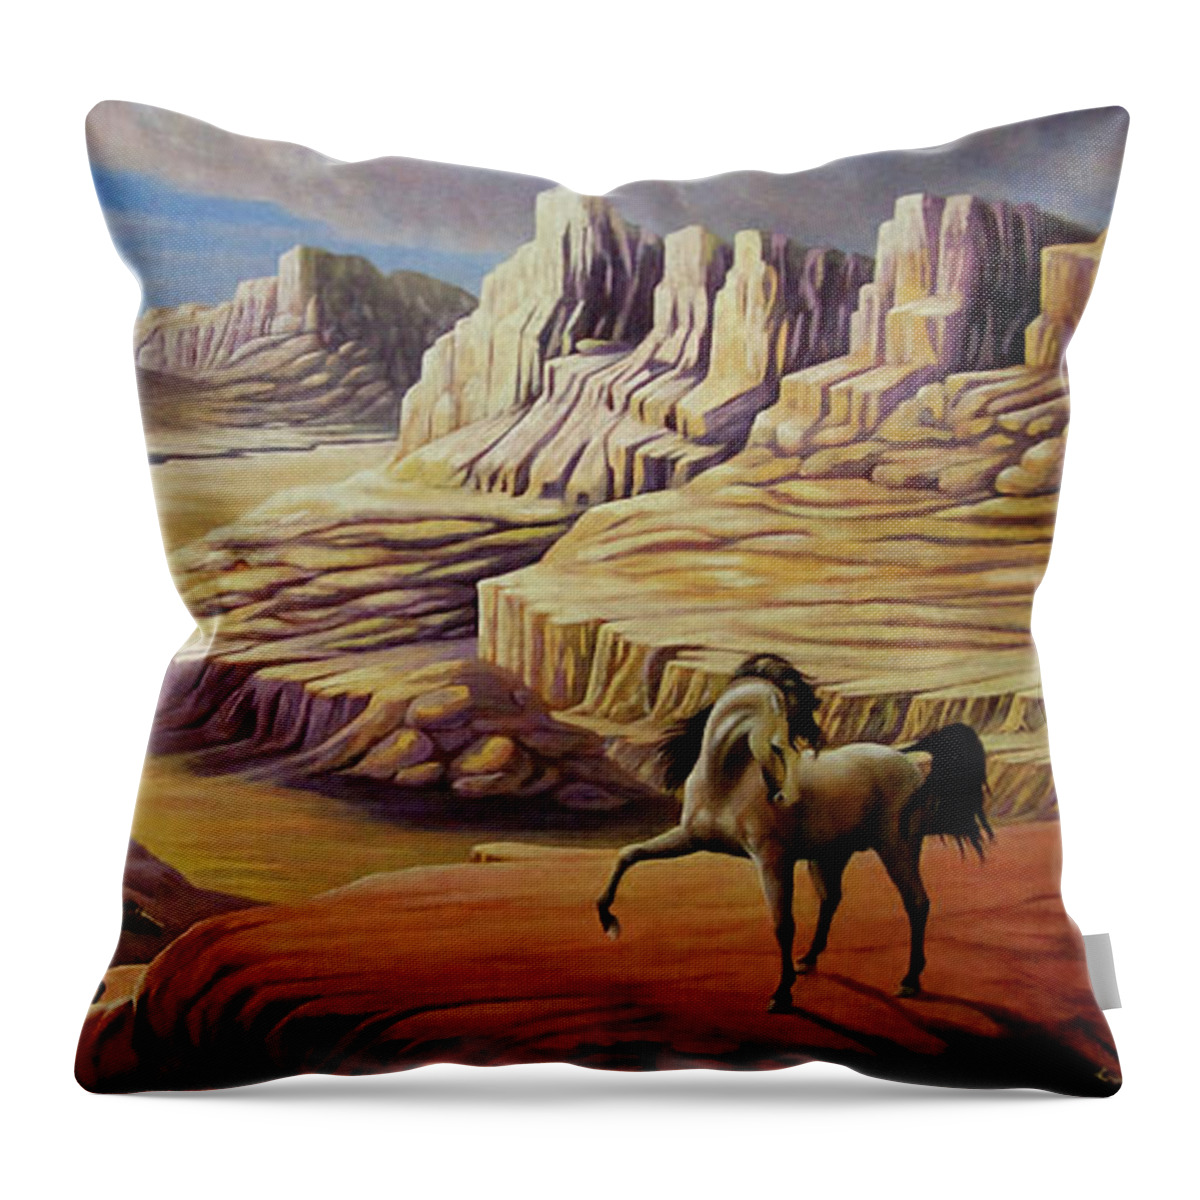 Horses Throw Pillow featuring the painting The Storm by Loxi Sibley